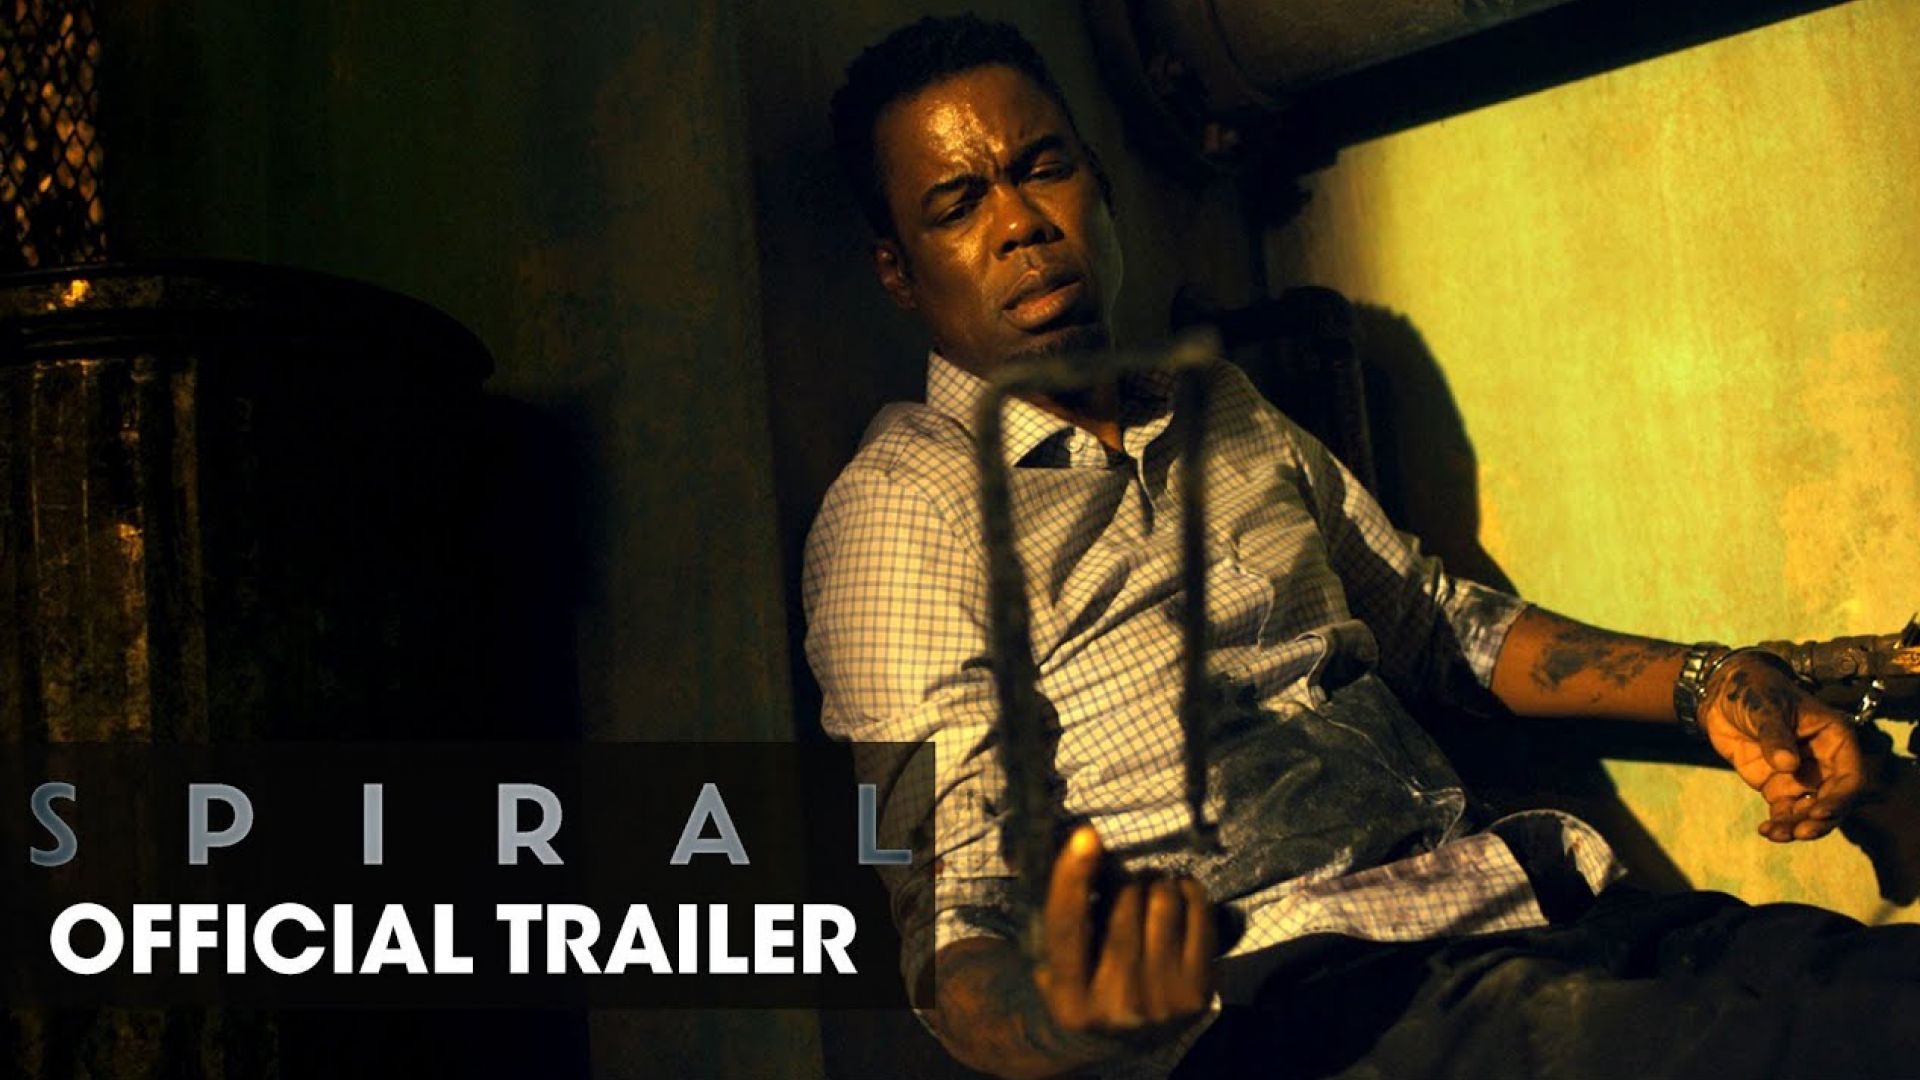 ‘Spiral: From the Book of Saw’ trailer 